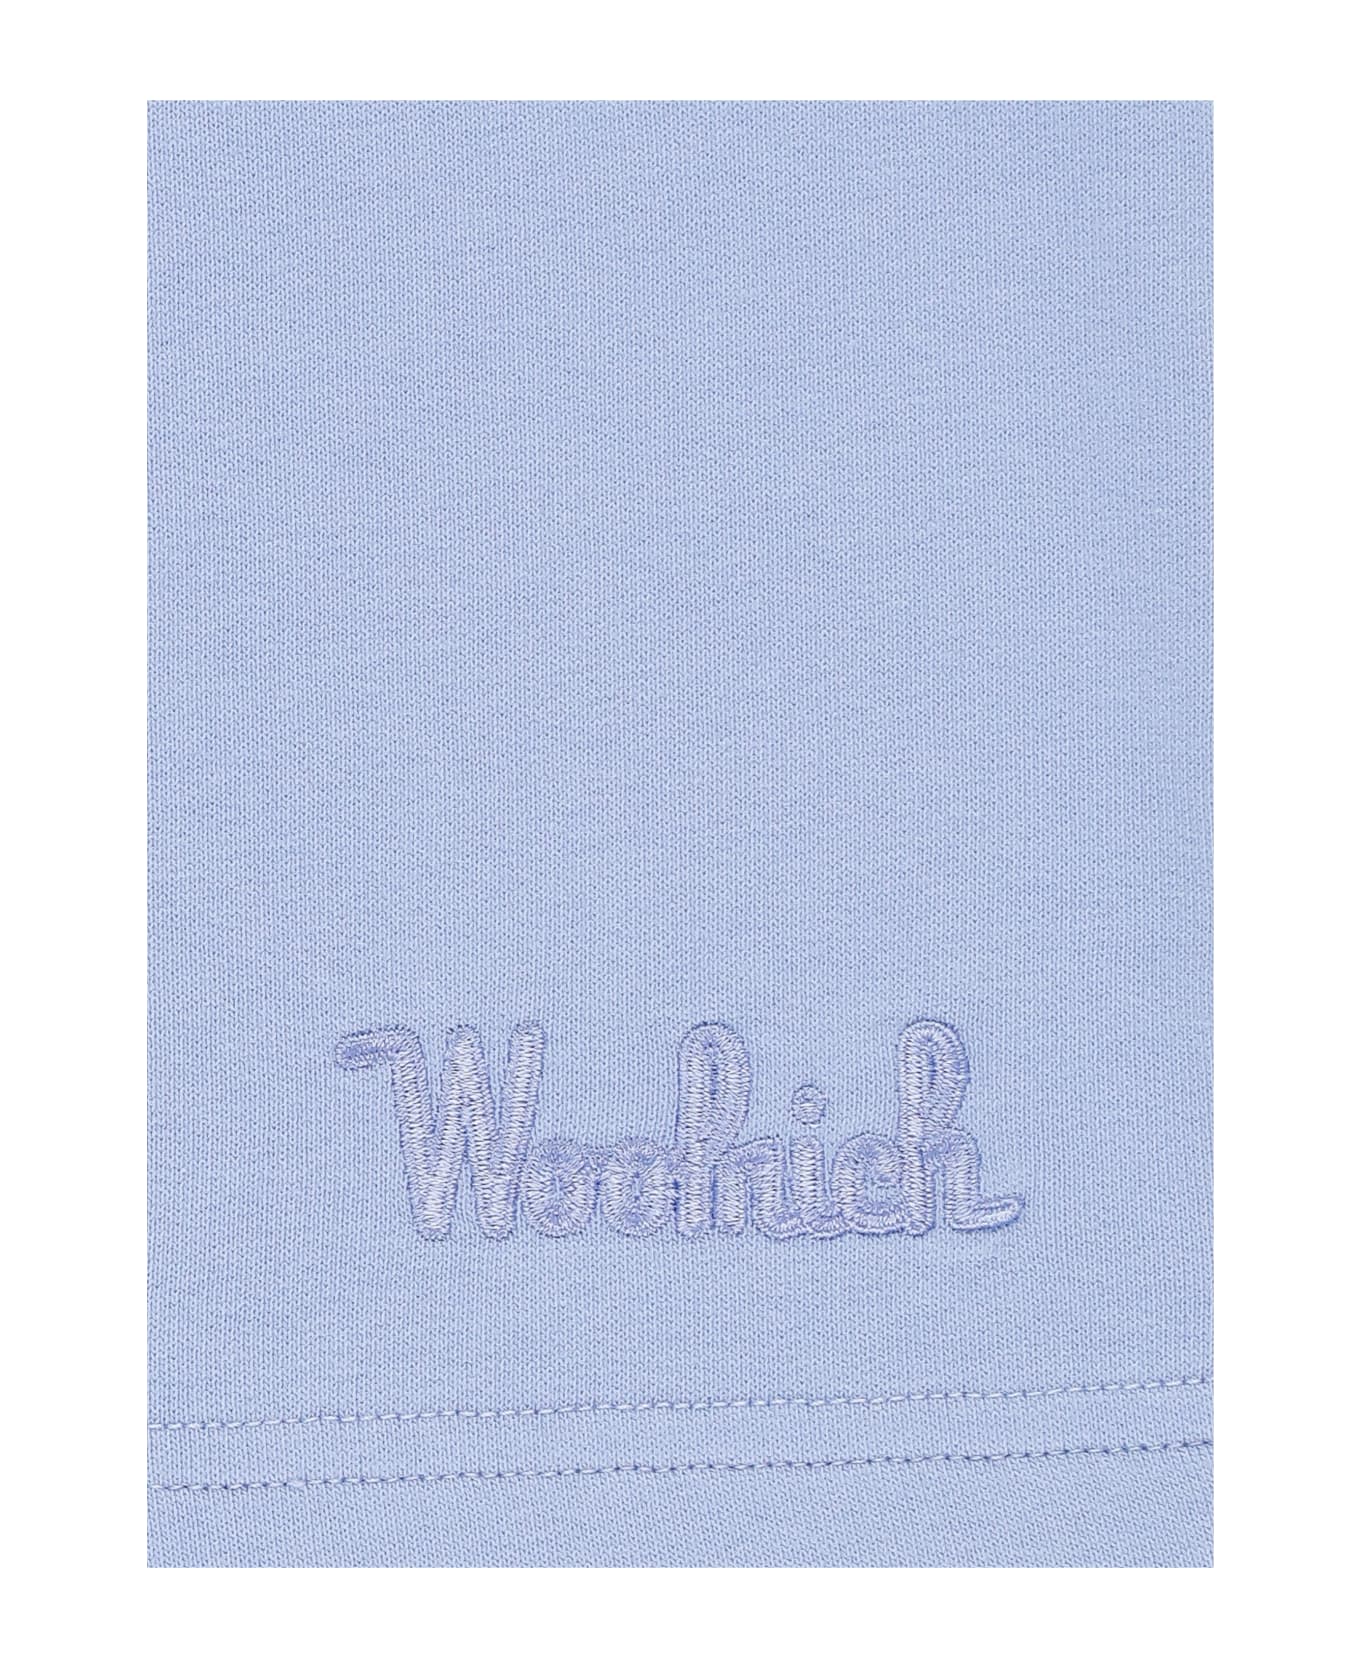 Woolrich Shorts With Logo - Blue